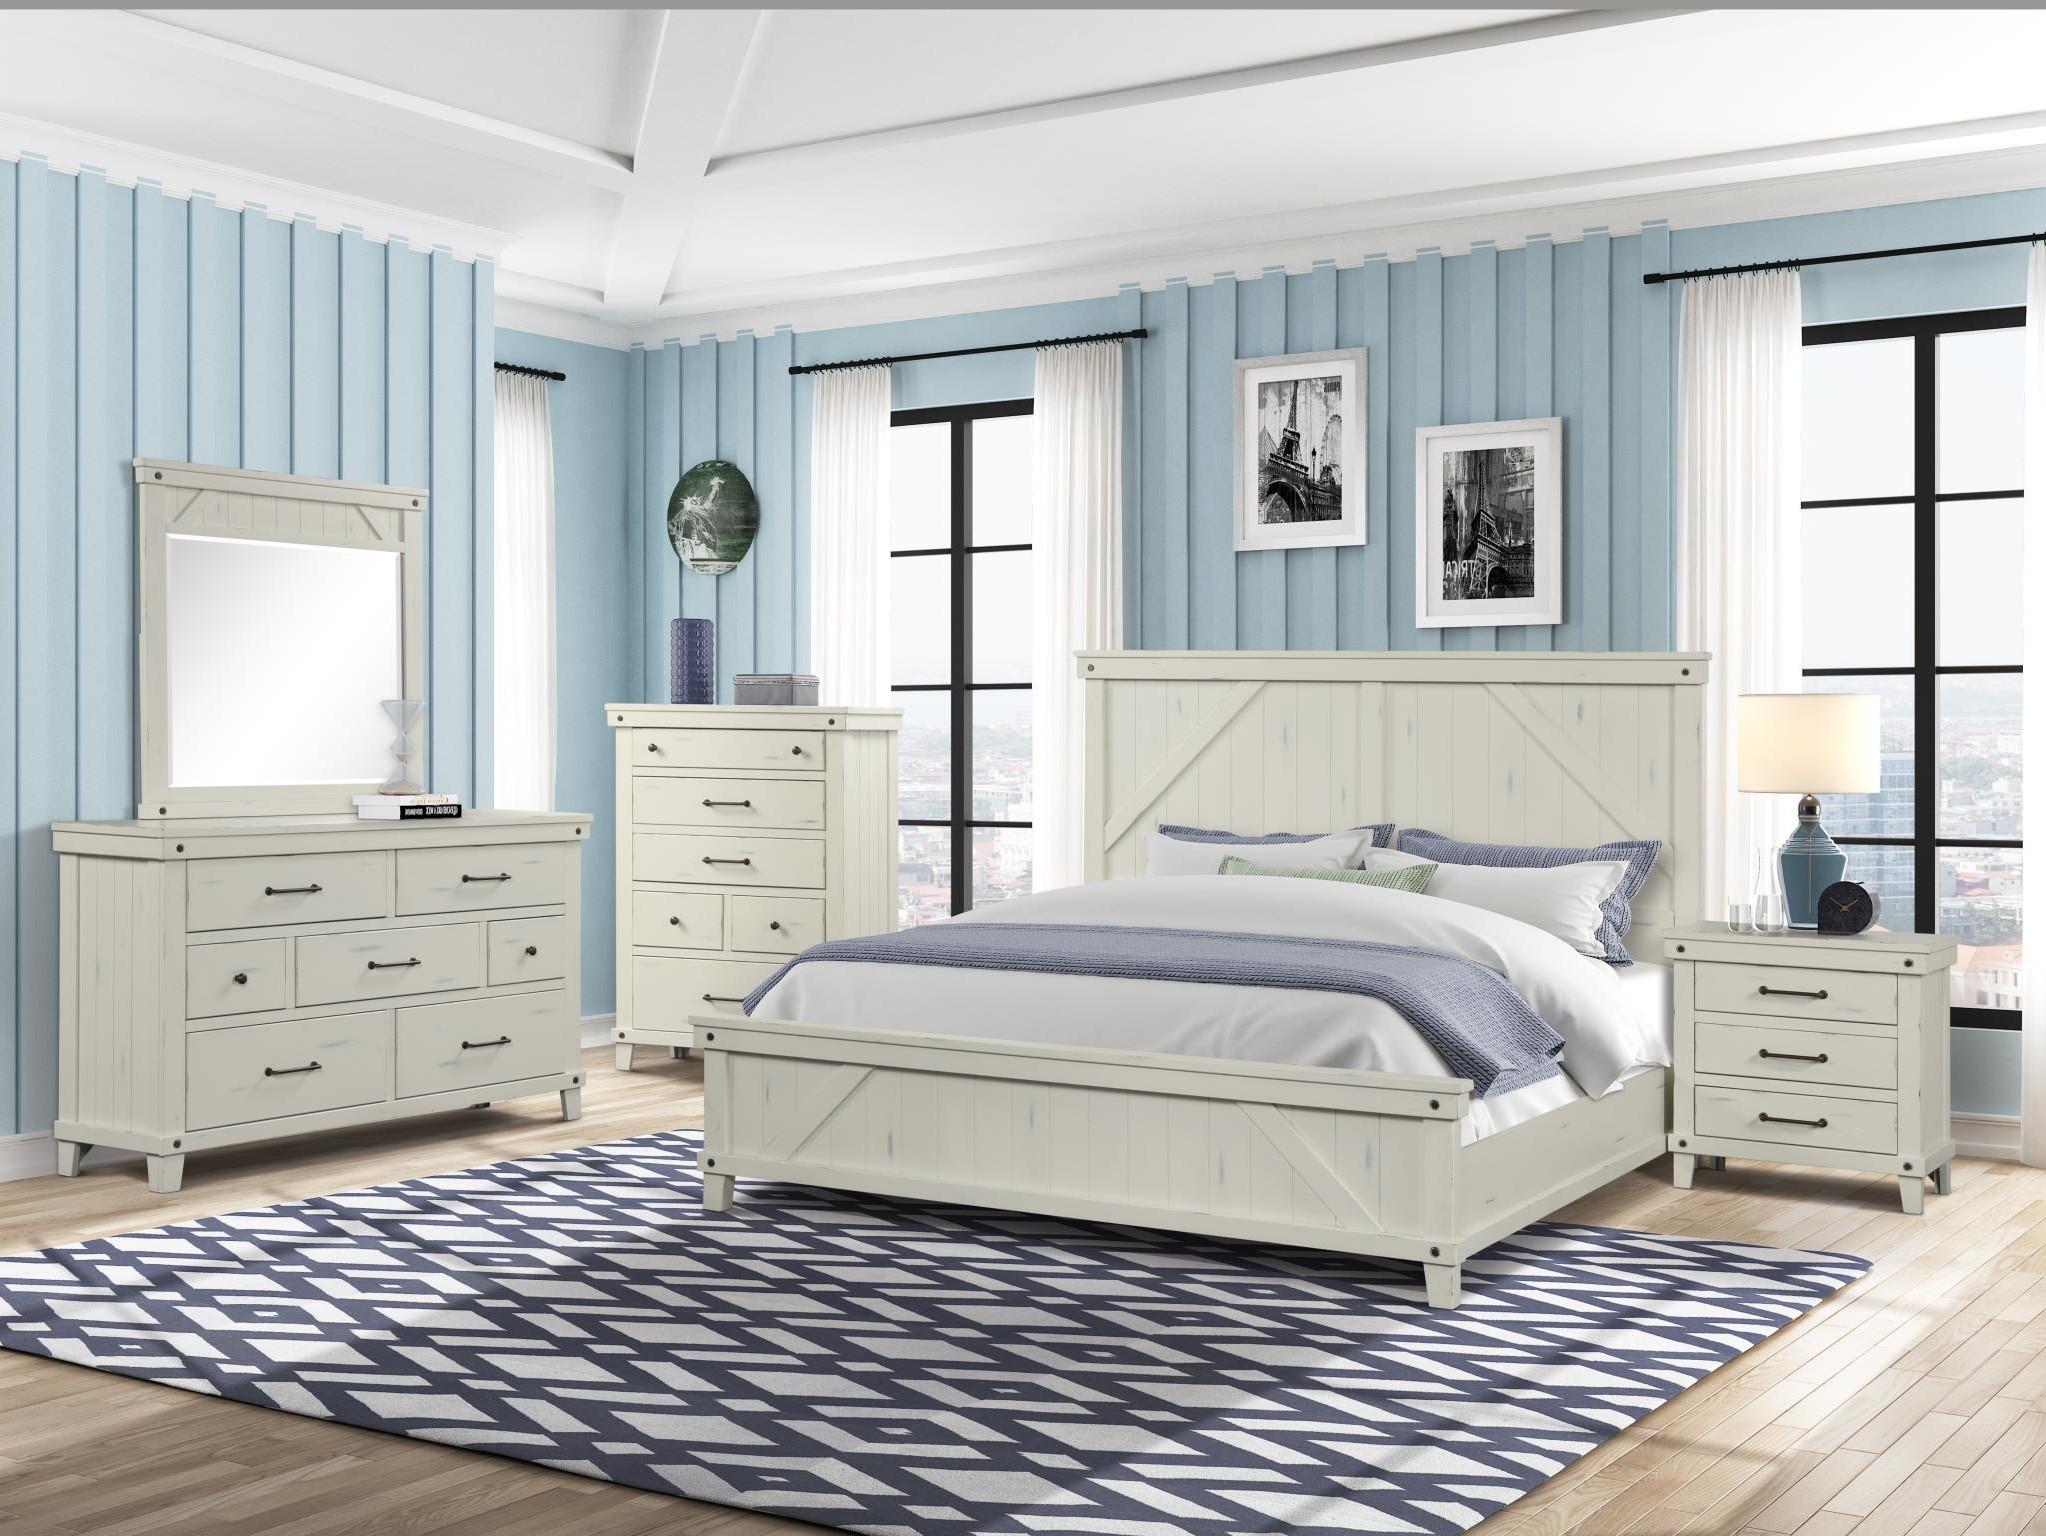 Classic, Transitional Bedroom Set SPRUCE CREEK 1709-105-Set-5 1709-105-2NDM-5PC in White 